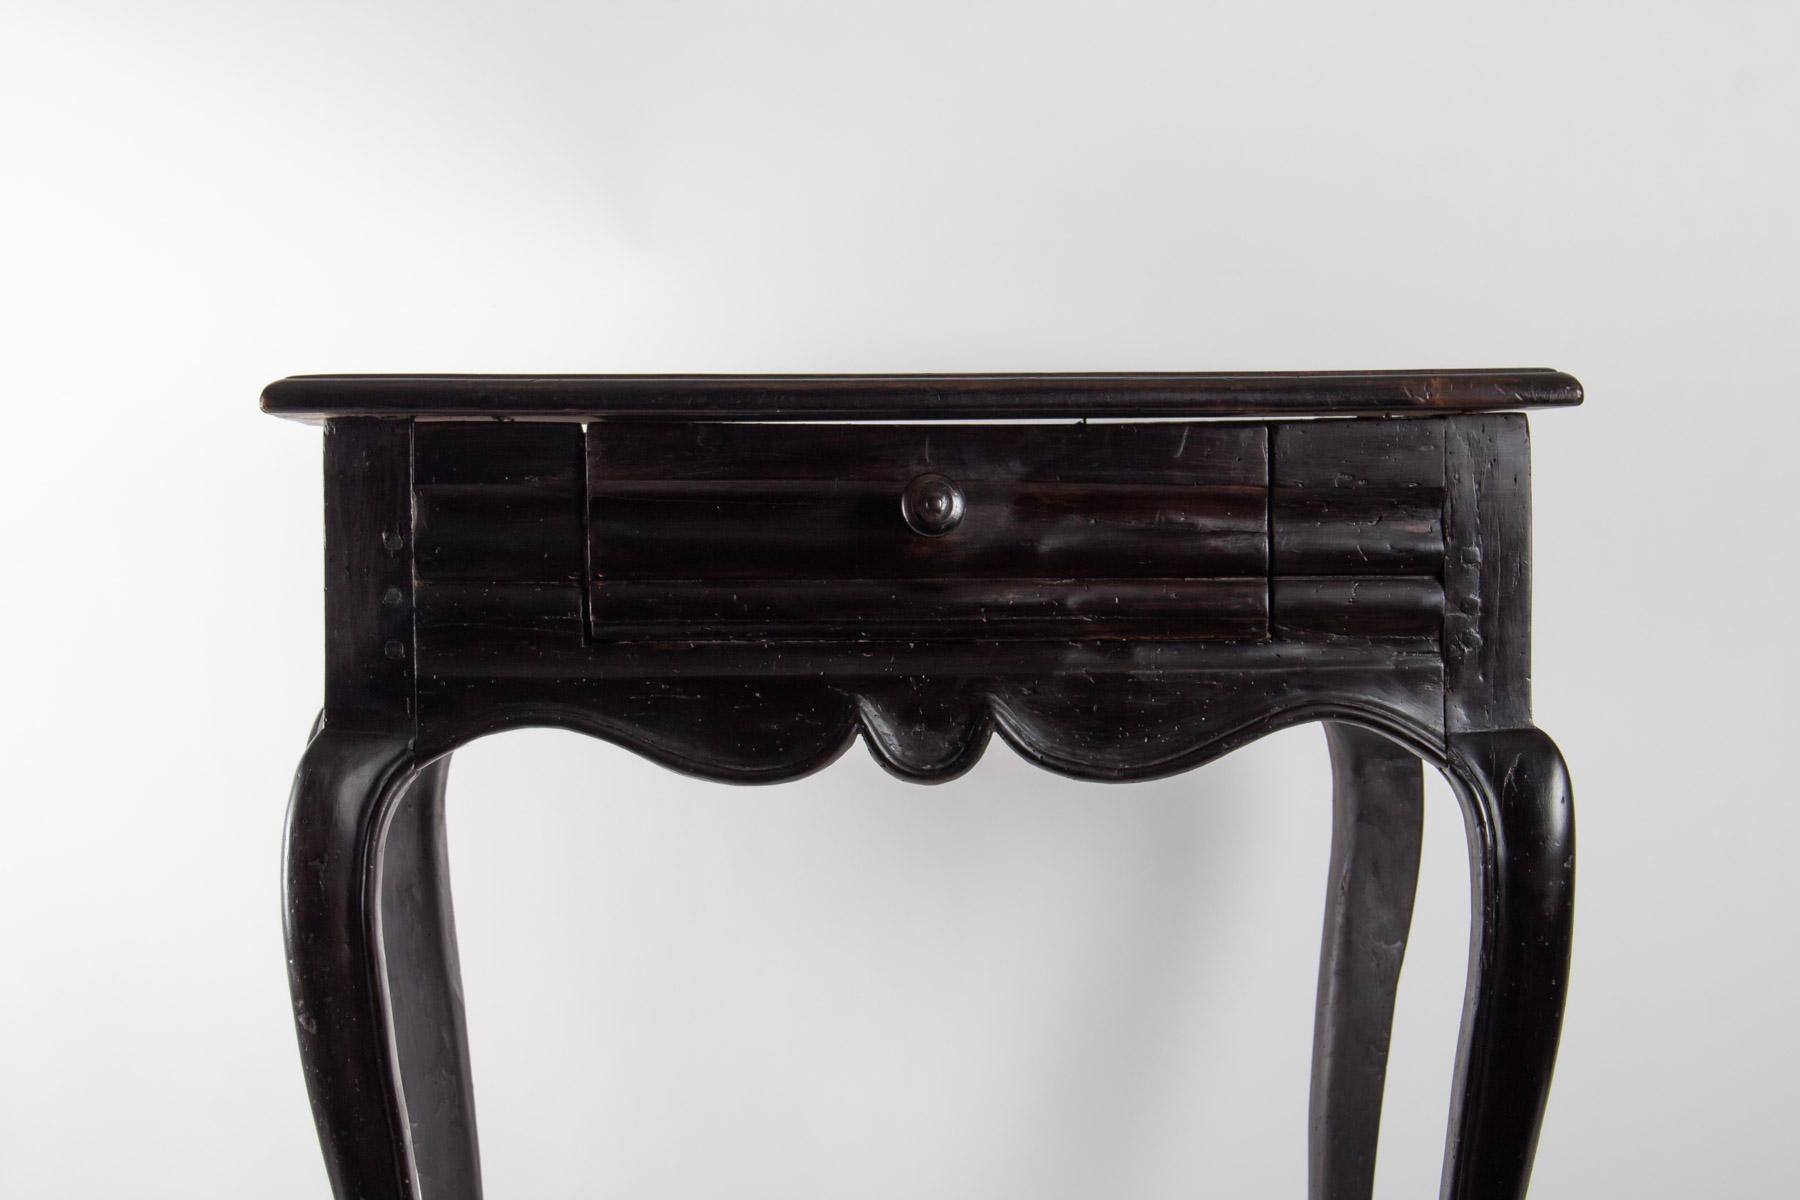 Table, office from the beginning of the 19th century, Louis XV style in blackened wood, very decorative antiquity
Measures: H 77cm, W 68cm, D 53cm.